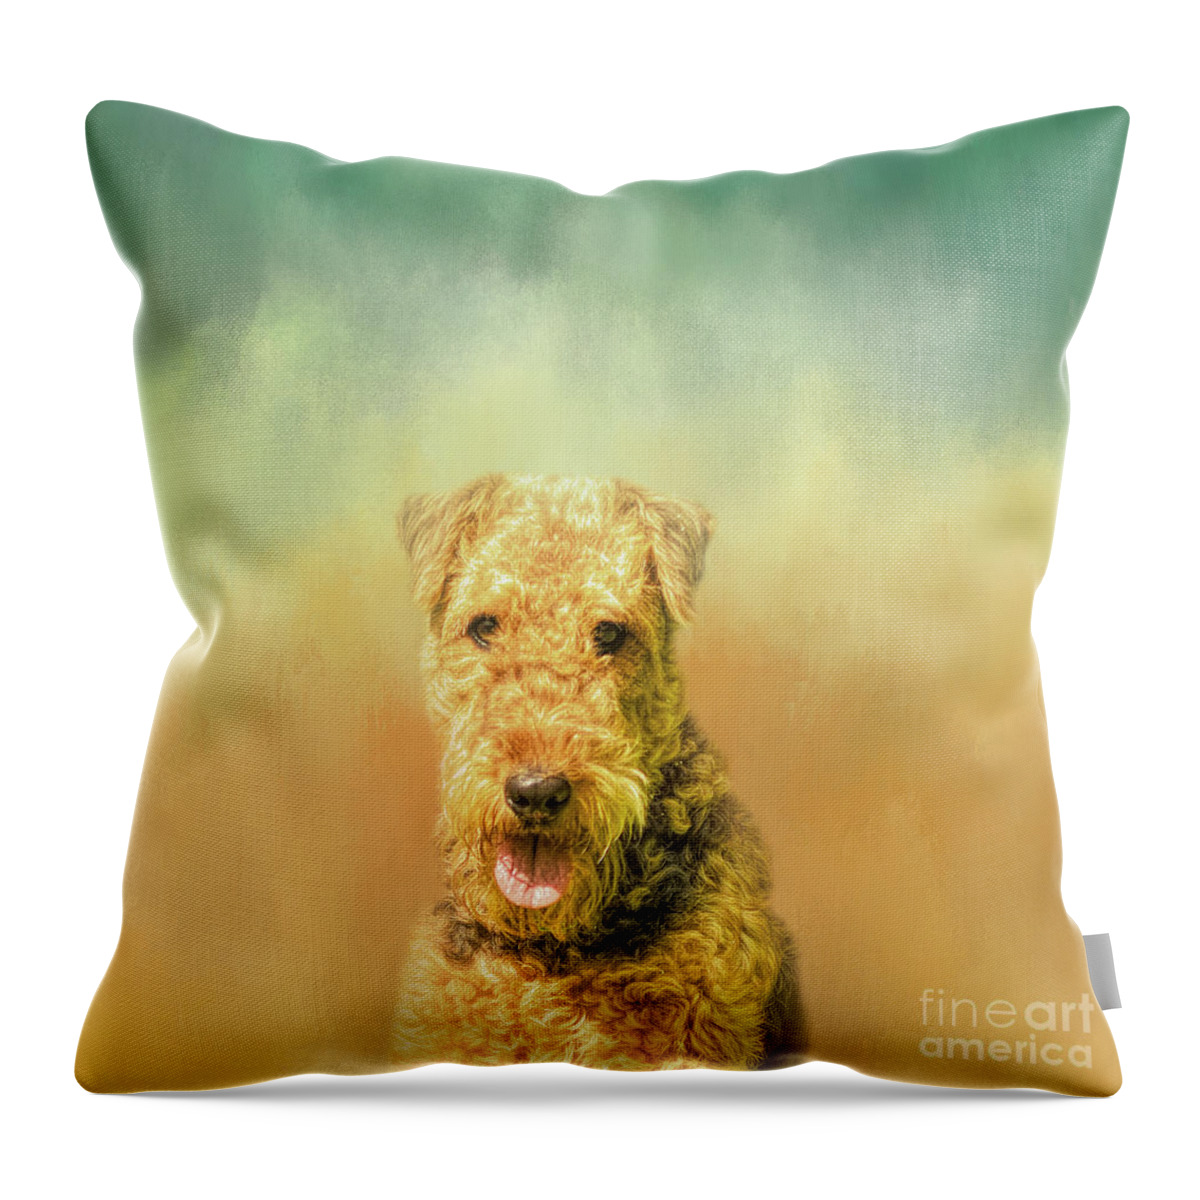 Airedale Terrier Throw Pillow featuring the mixed media Cute Airedale Terrier Portrait by Elisabeth Lucas